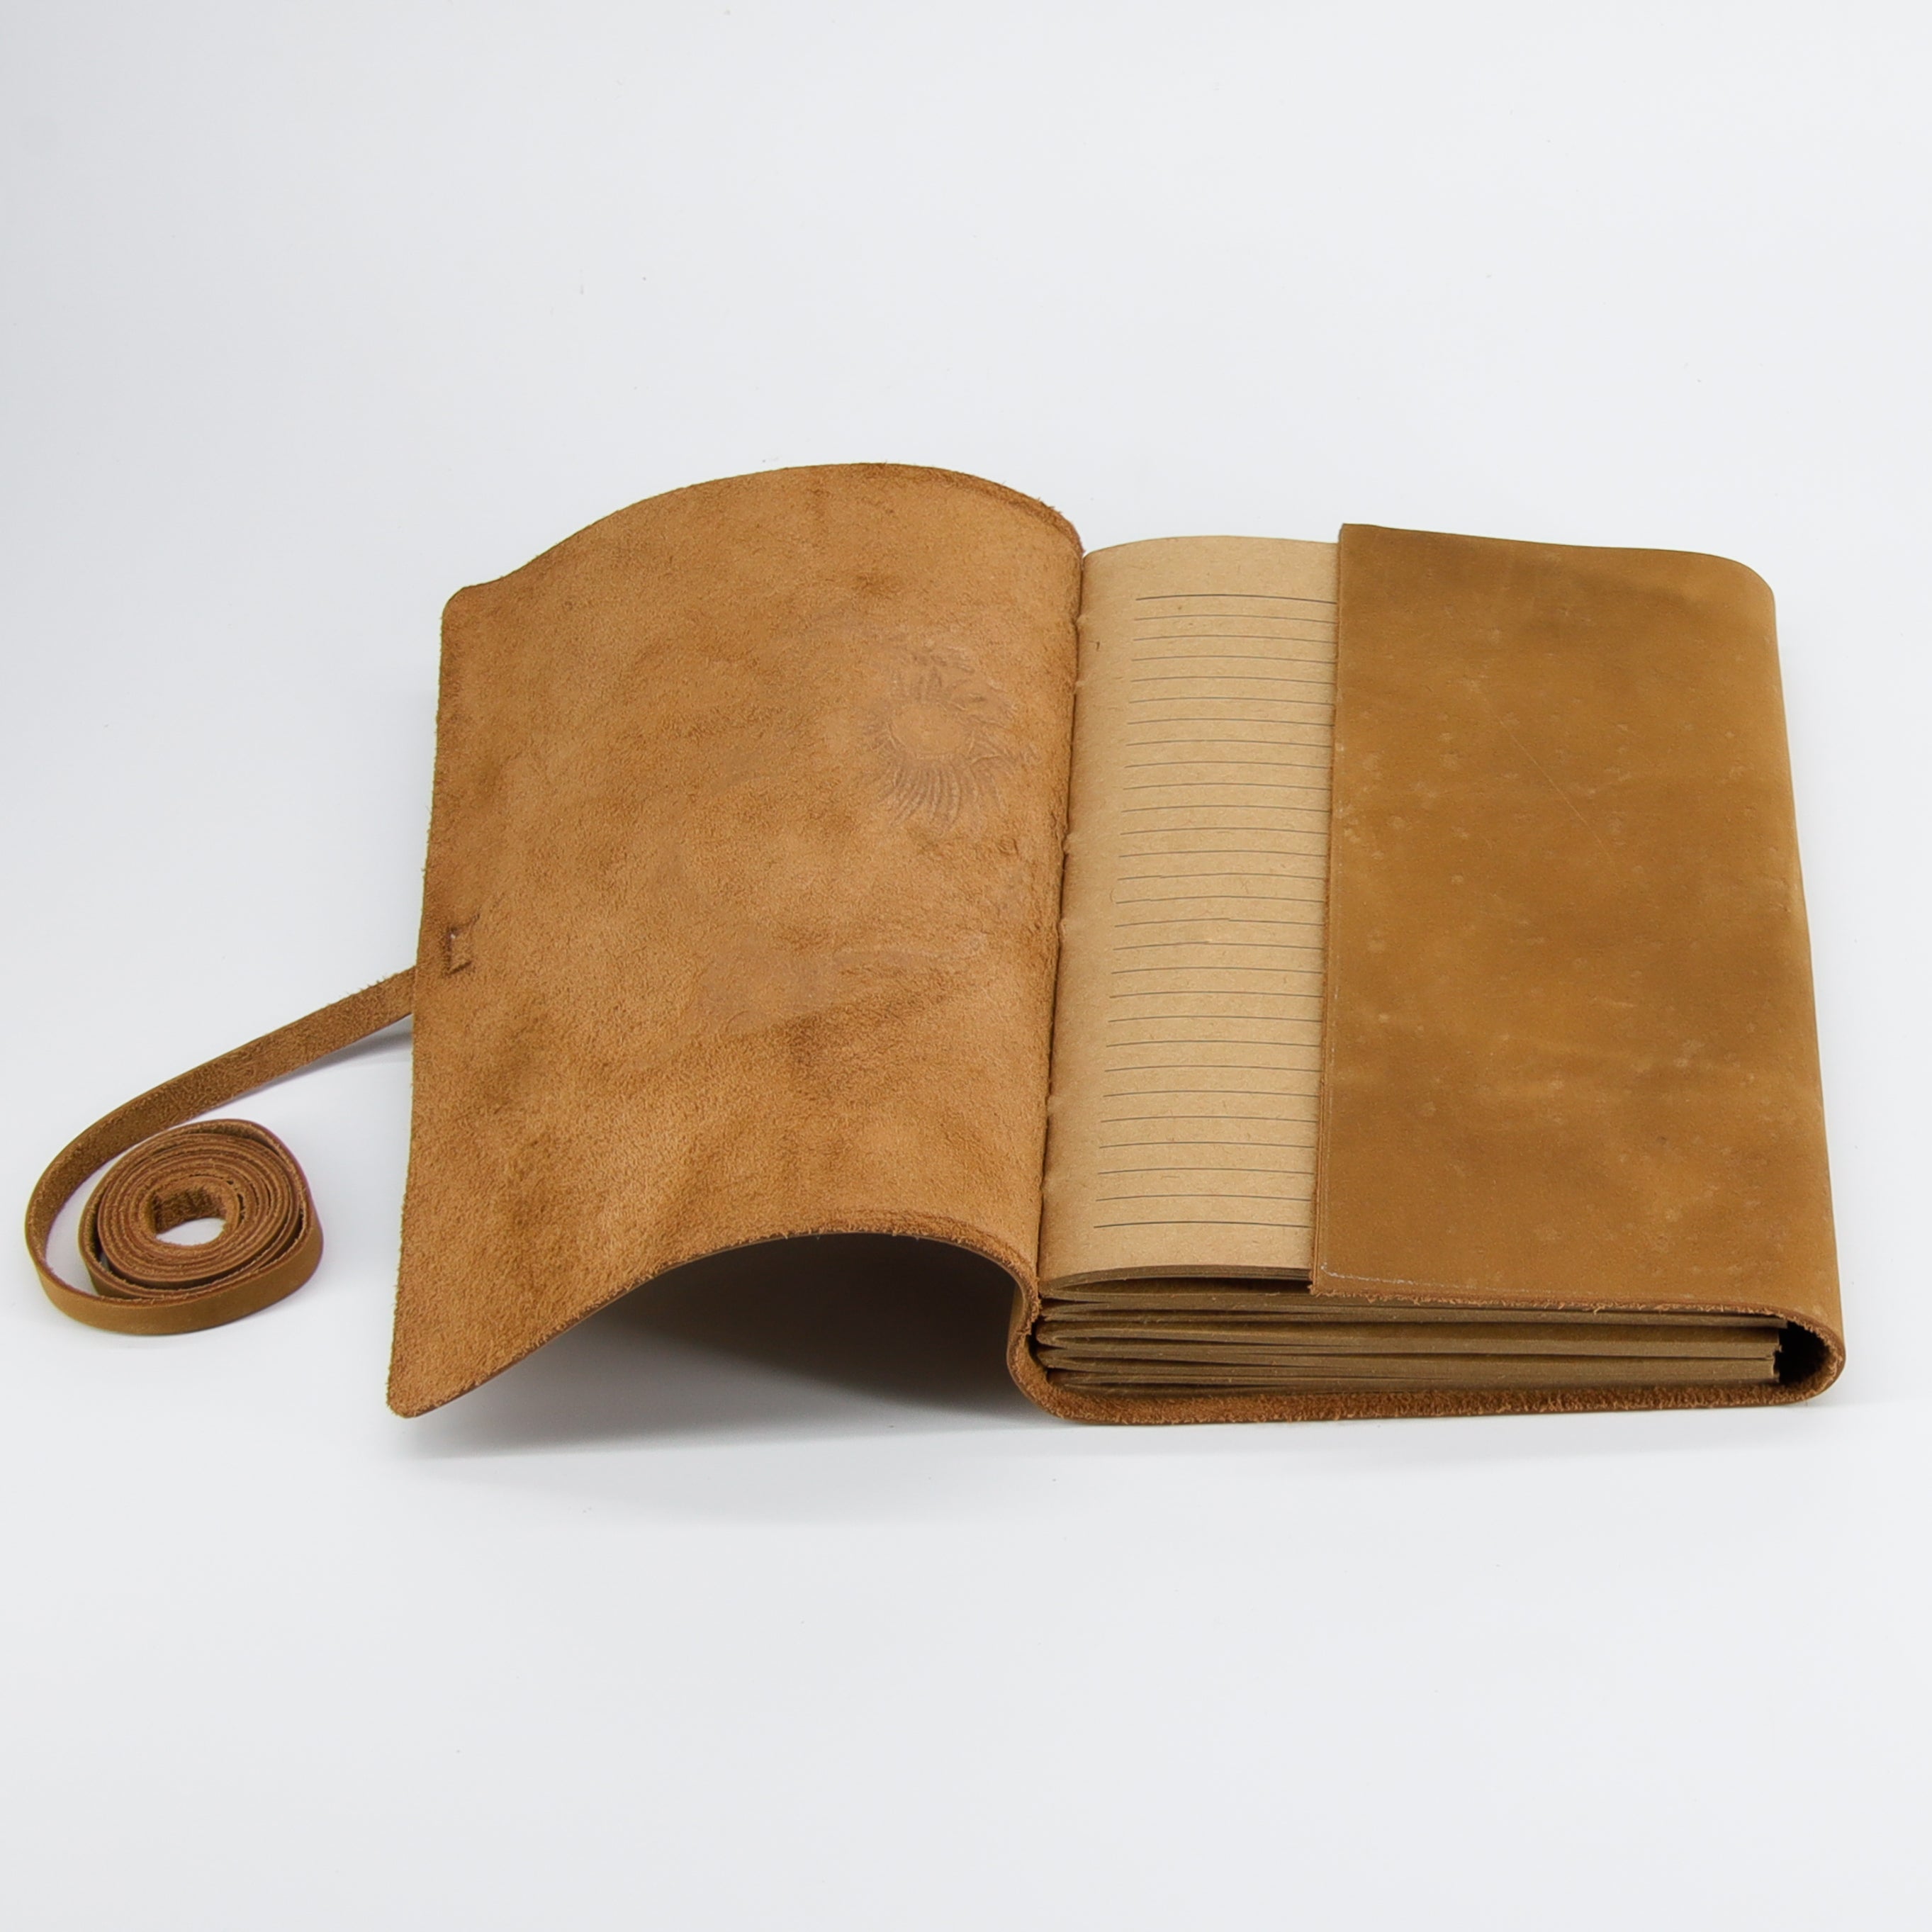 Wisdom Leather Journal with Gold Embossing